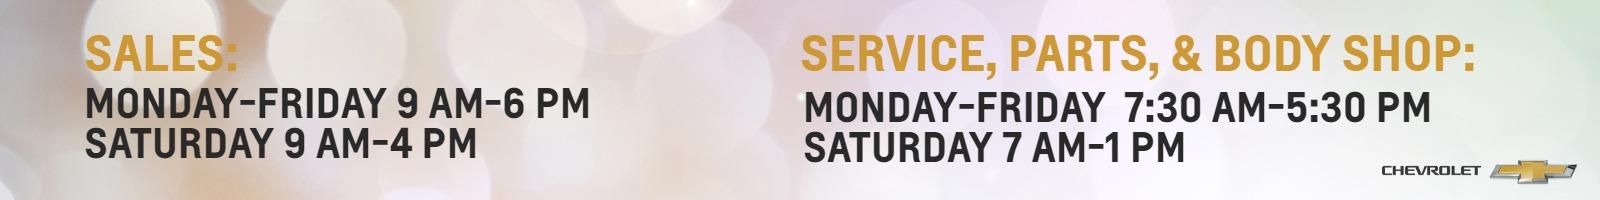 Sales and services hours of operations